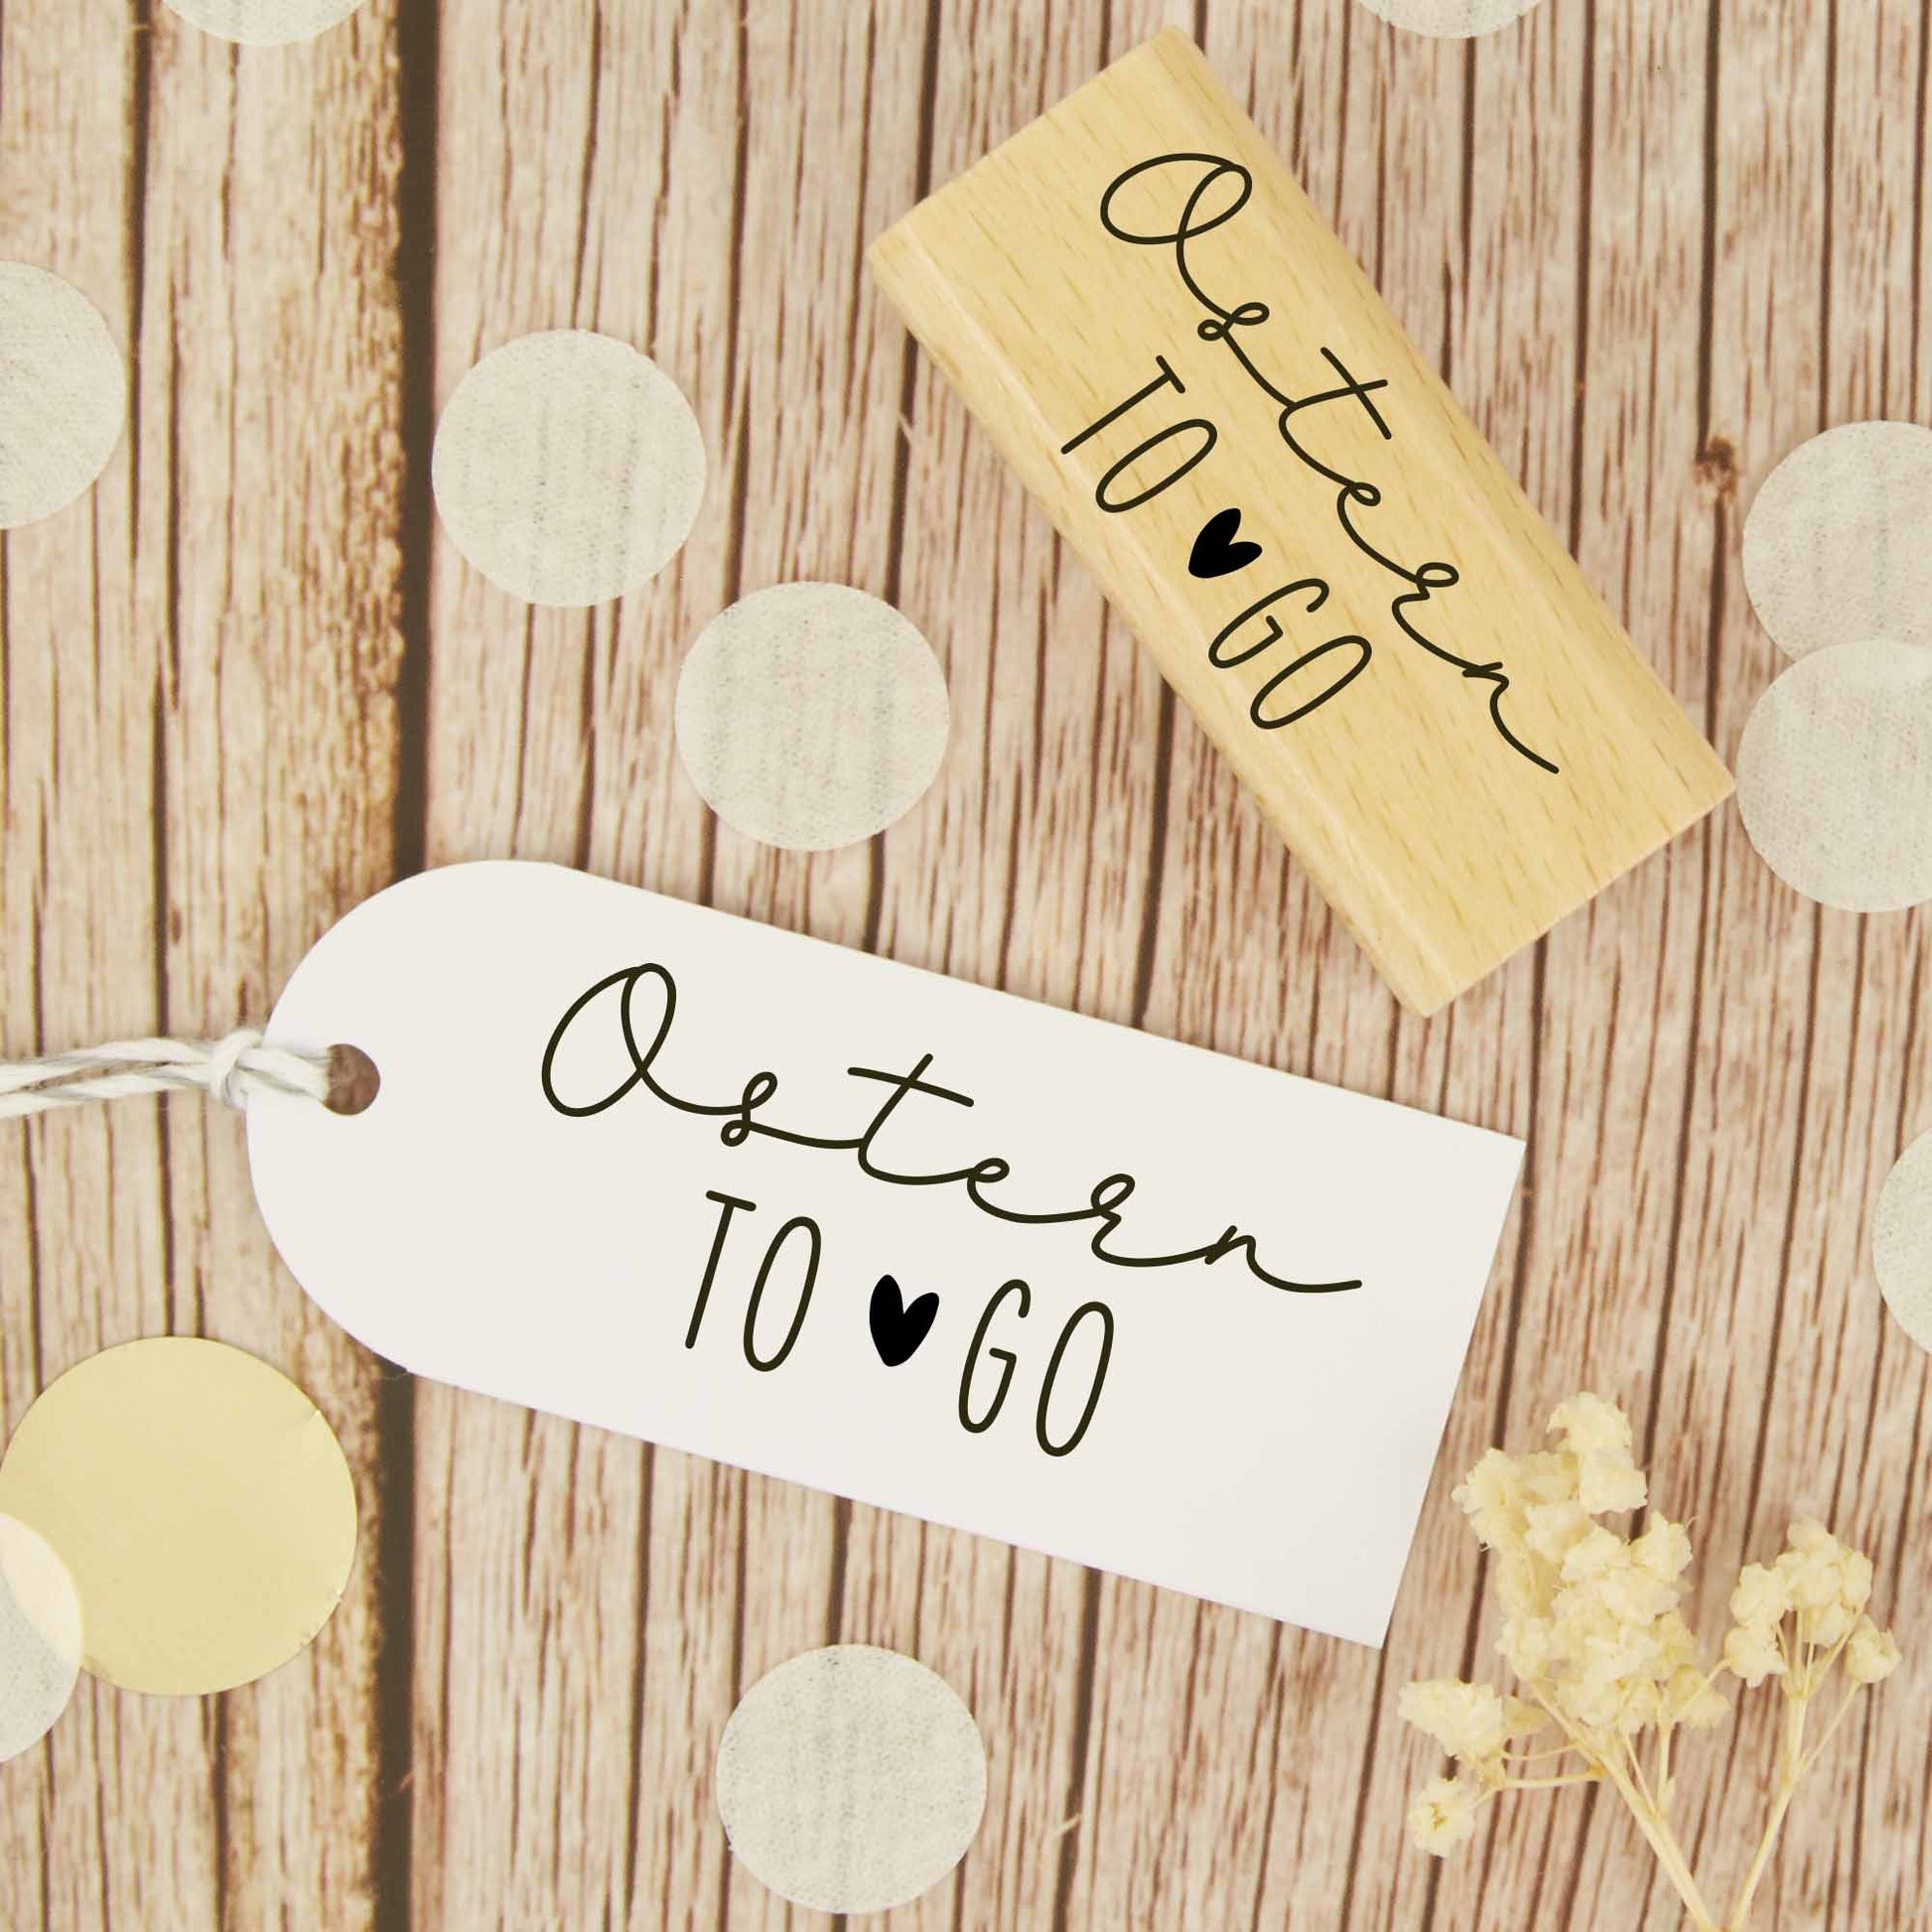 Osterstempel "Ostern to go" - IN LOVE WITH PAPER